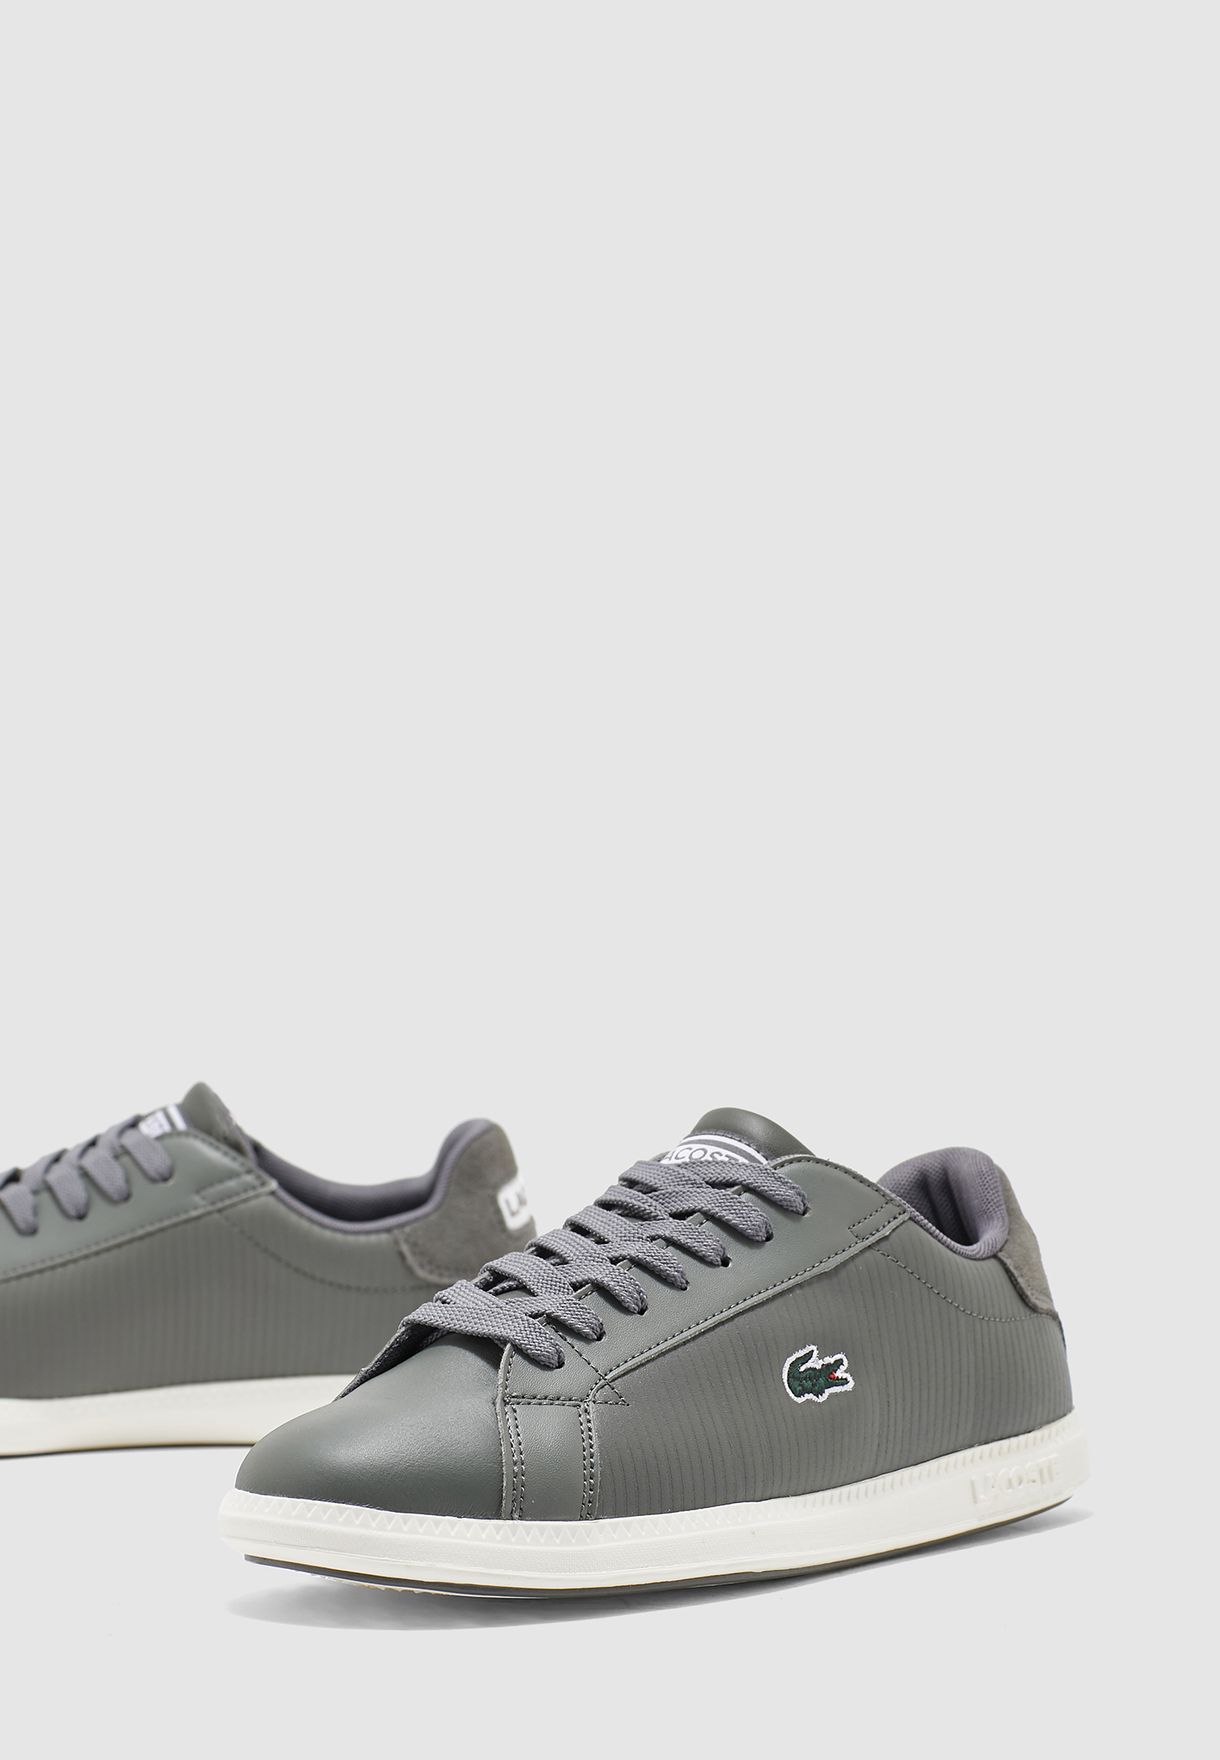 lacoste gray shoes